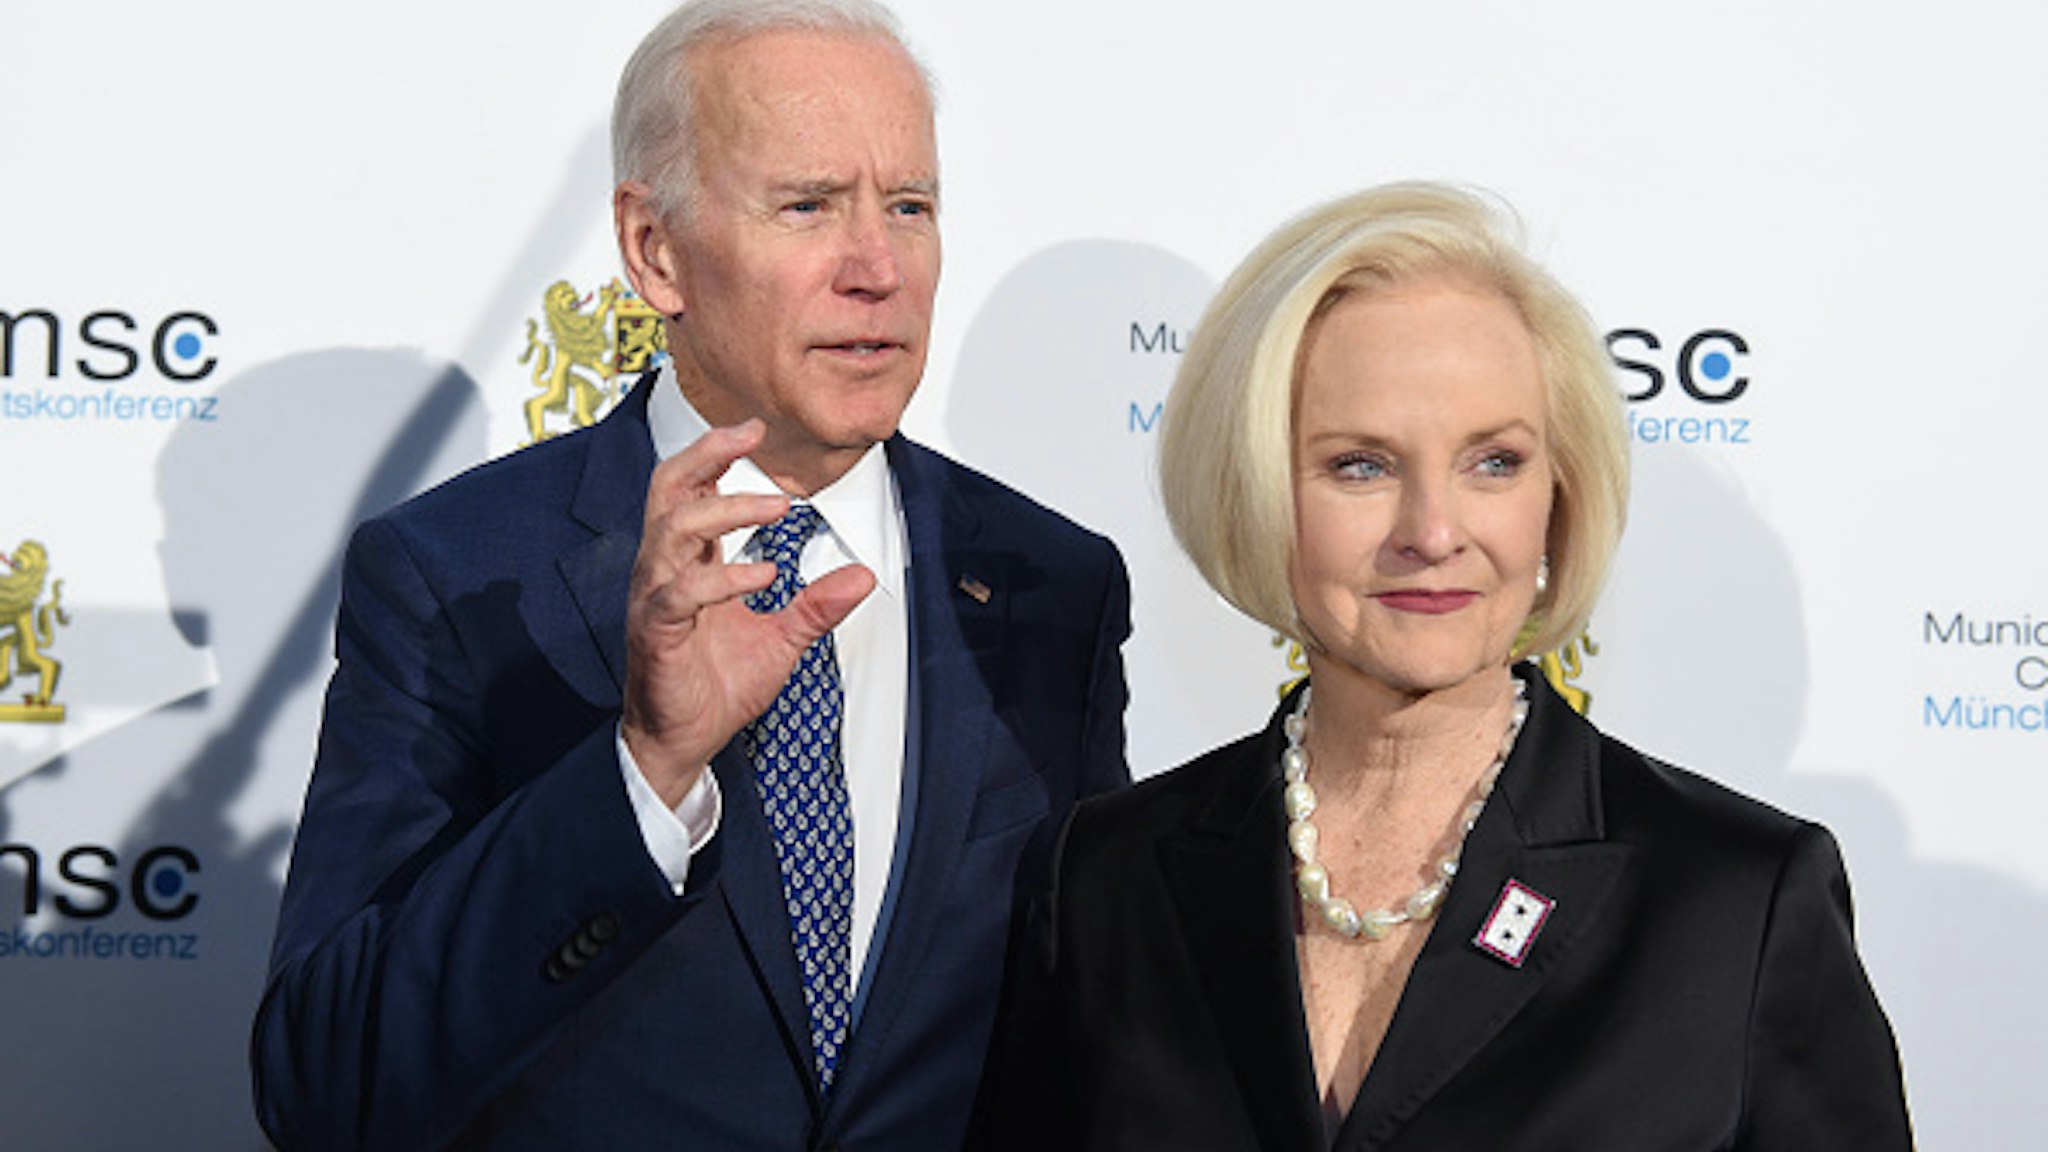 Joe Biden, former Vice President of the United States, and Cindy McCain, the wife of US Senator McCain, arrive at the reception of the Bavarian State Chancellery in the course of the 54th Munich Security Conference at the residency in Munich, Germany, 17 February 2018. More than 500 guests among those head of states and head of governments, are expected to attend the three day conference. Photo: Andreas Gebert/dpa